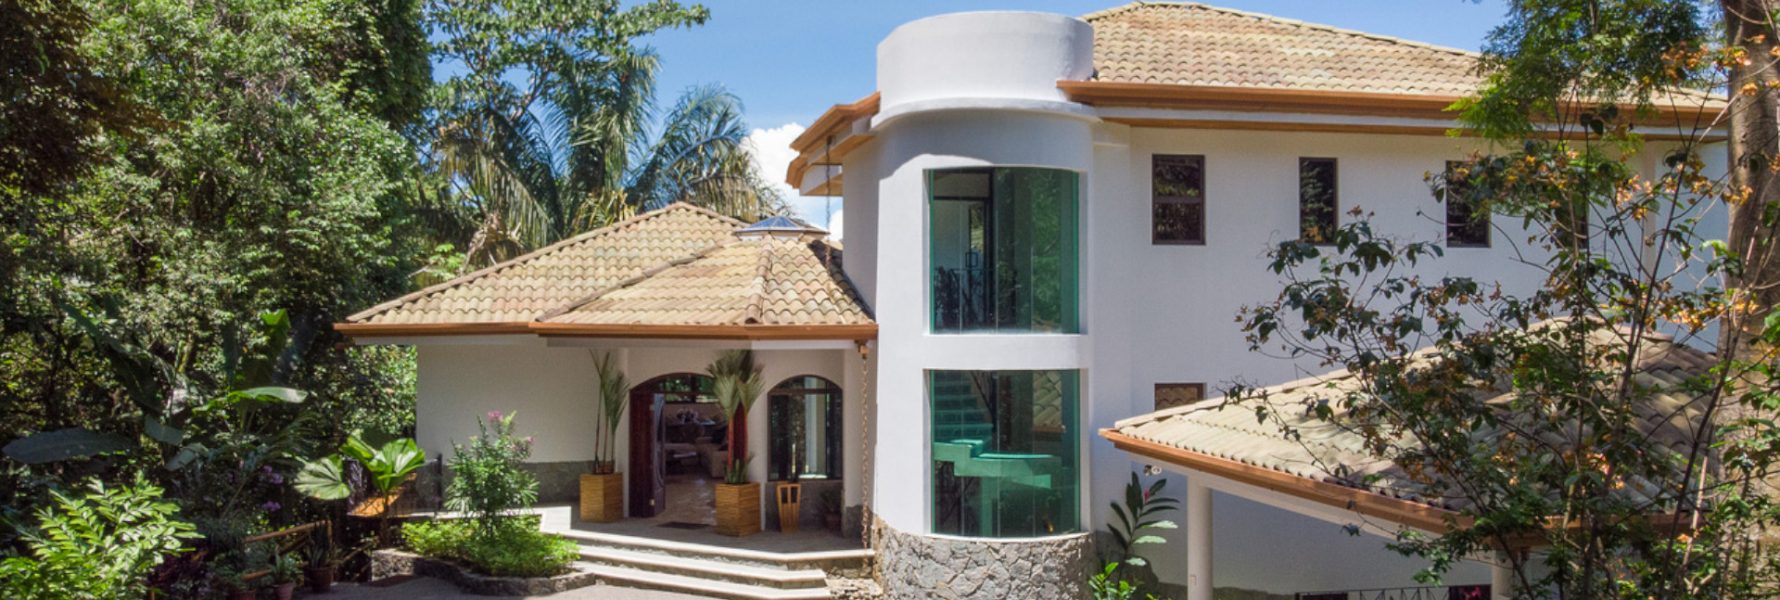 The front of the villa as you arrive lets you know you are in for a special vacation in Manuel Antonio. 